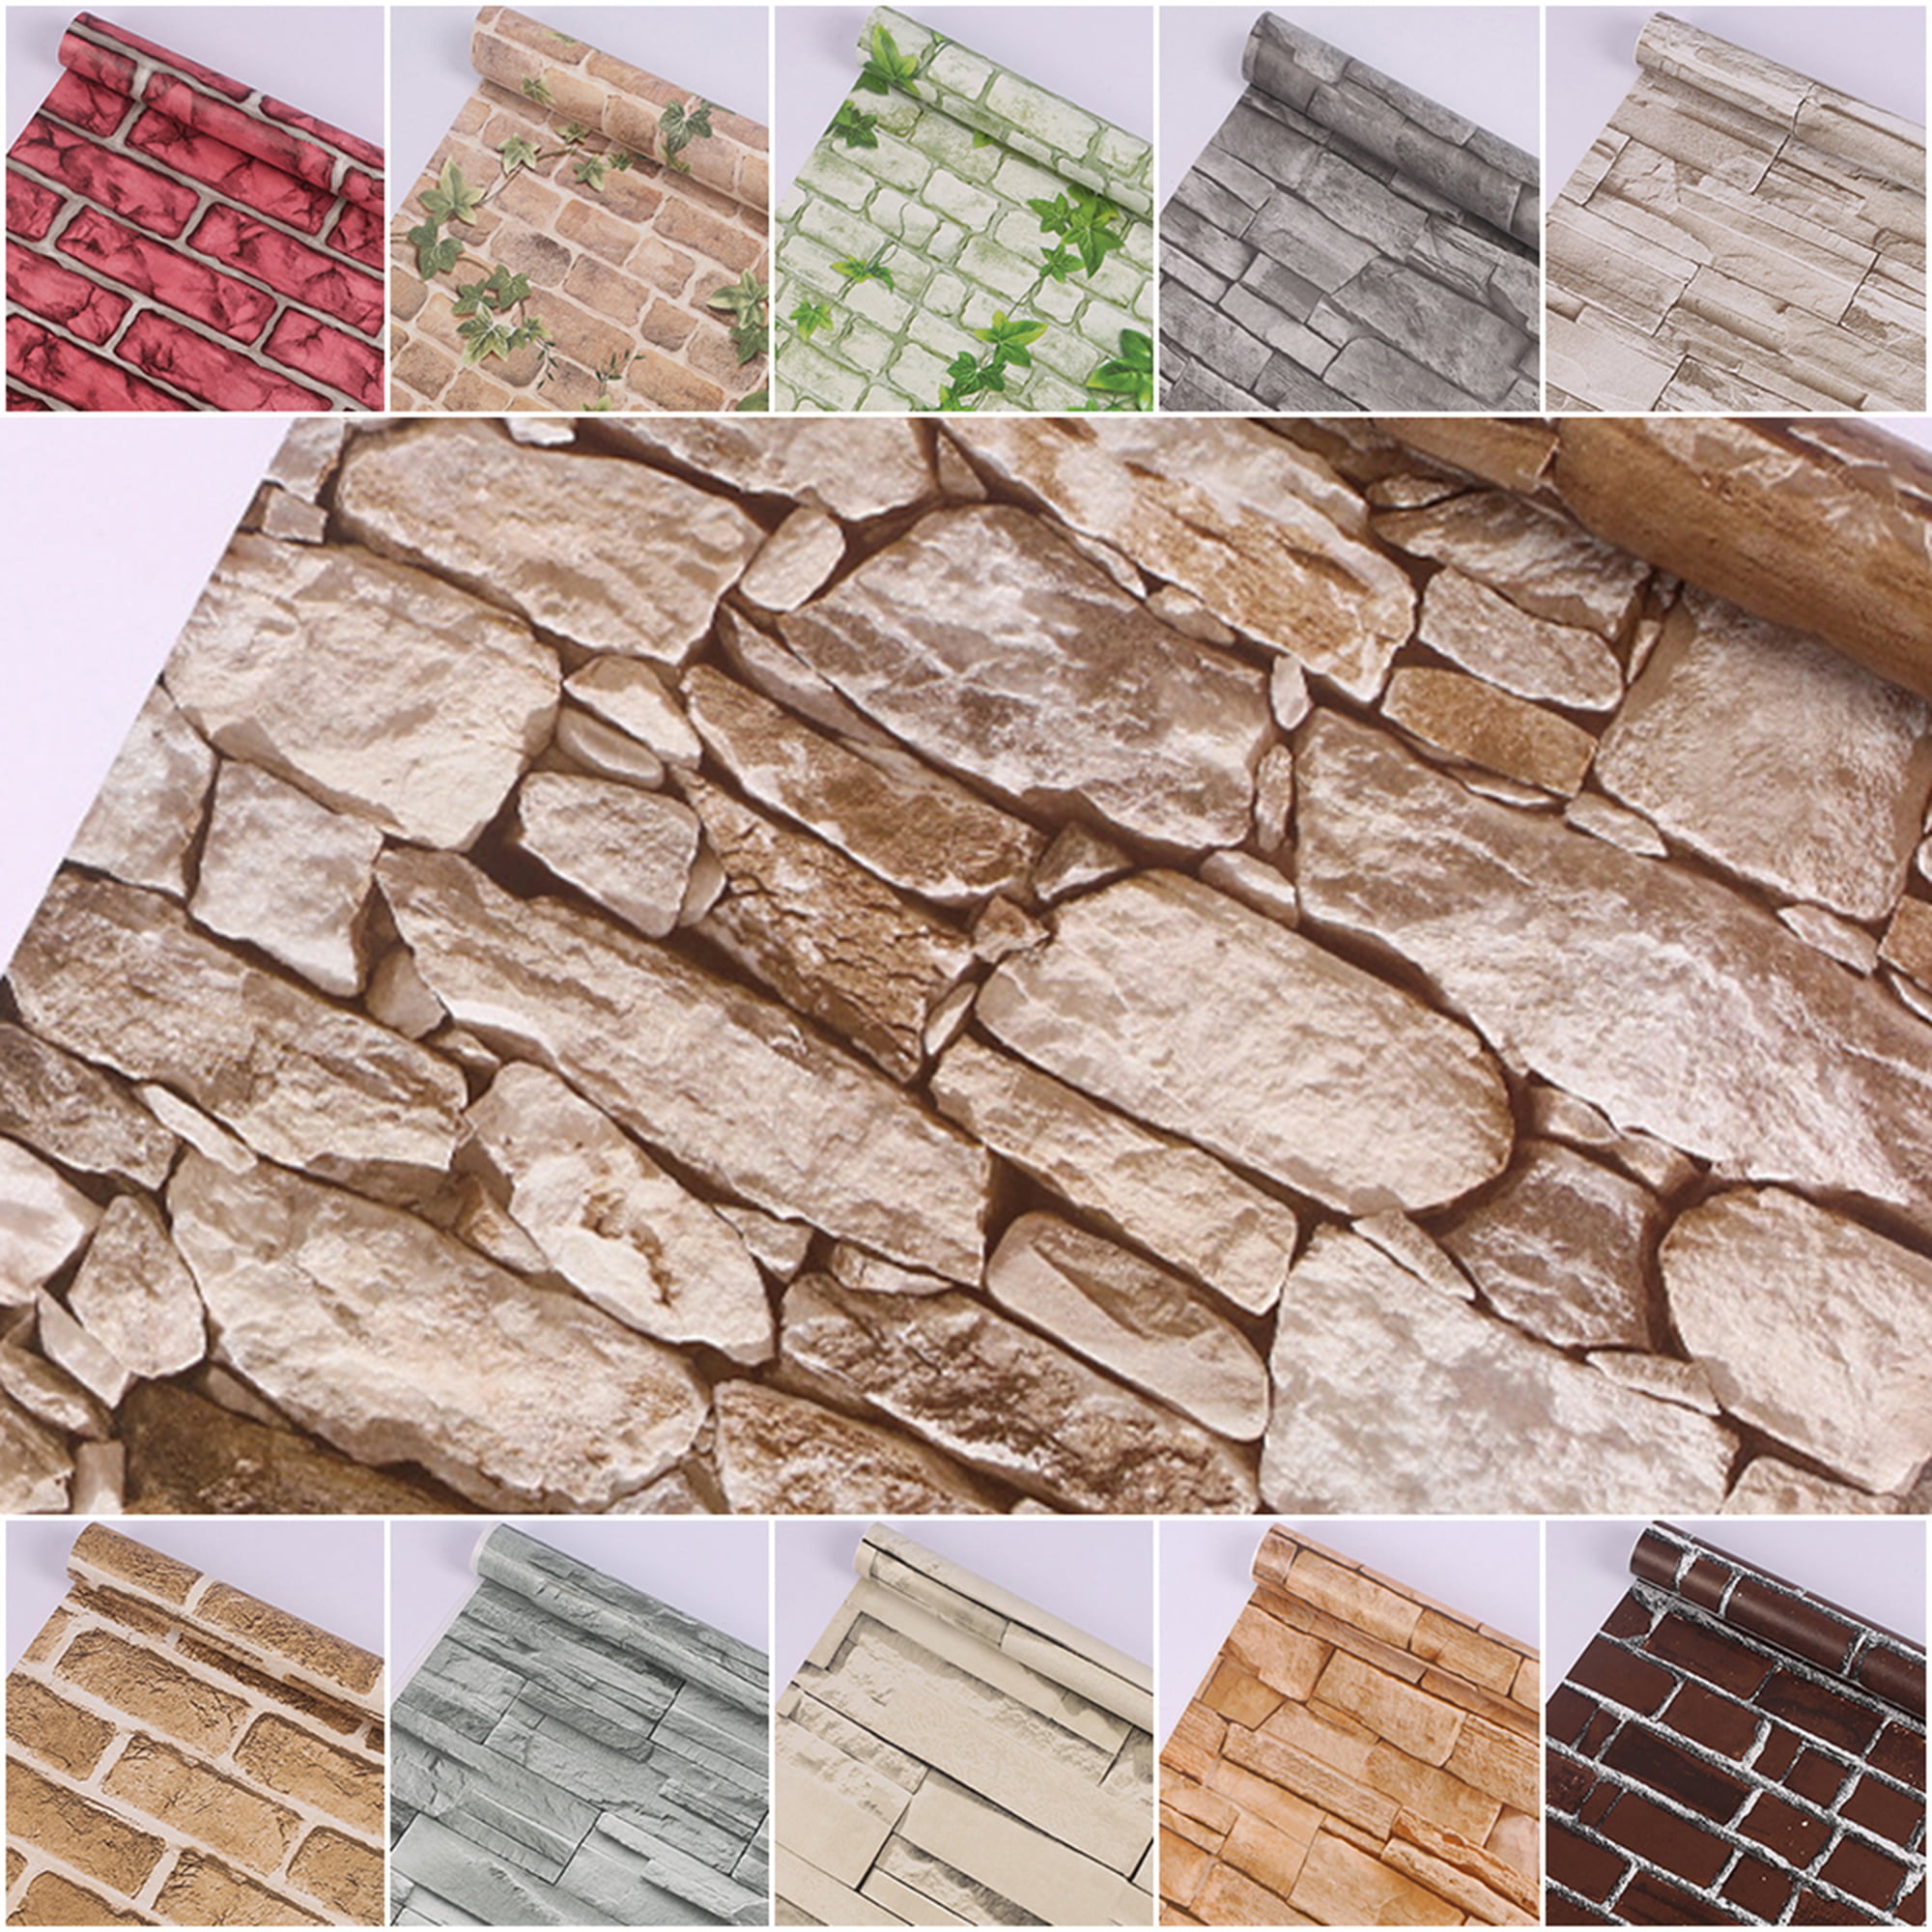 Details about   10M 3D Removable Self-adhesive Wallpaper Film Stone Brick Sticker Home Decor ღ